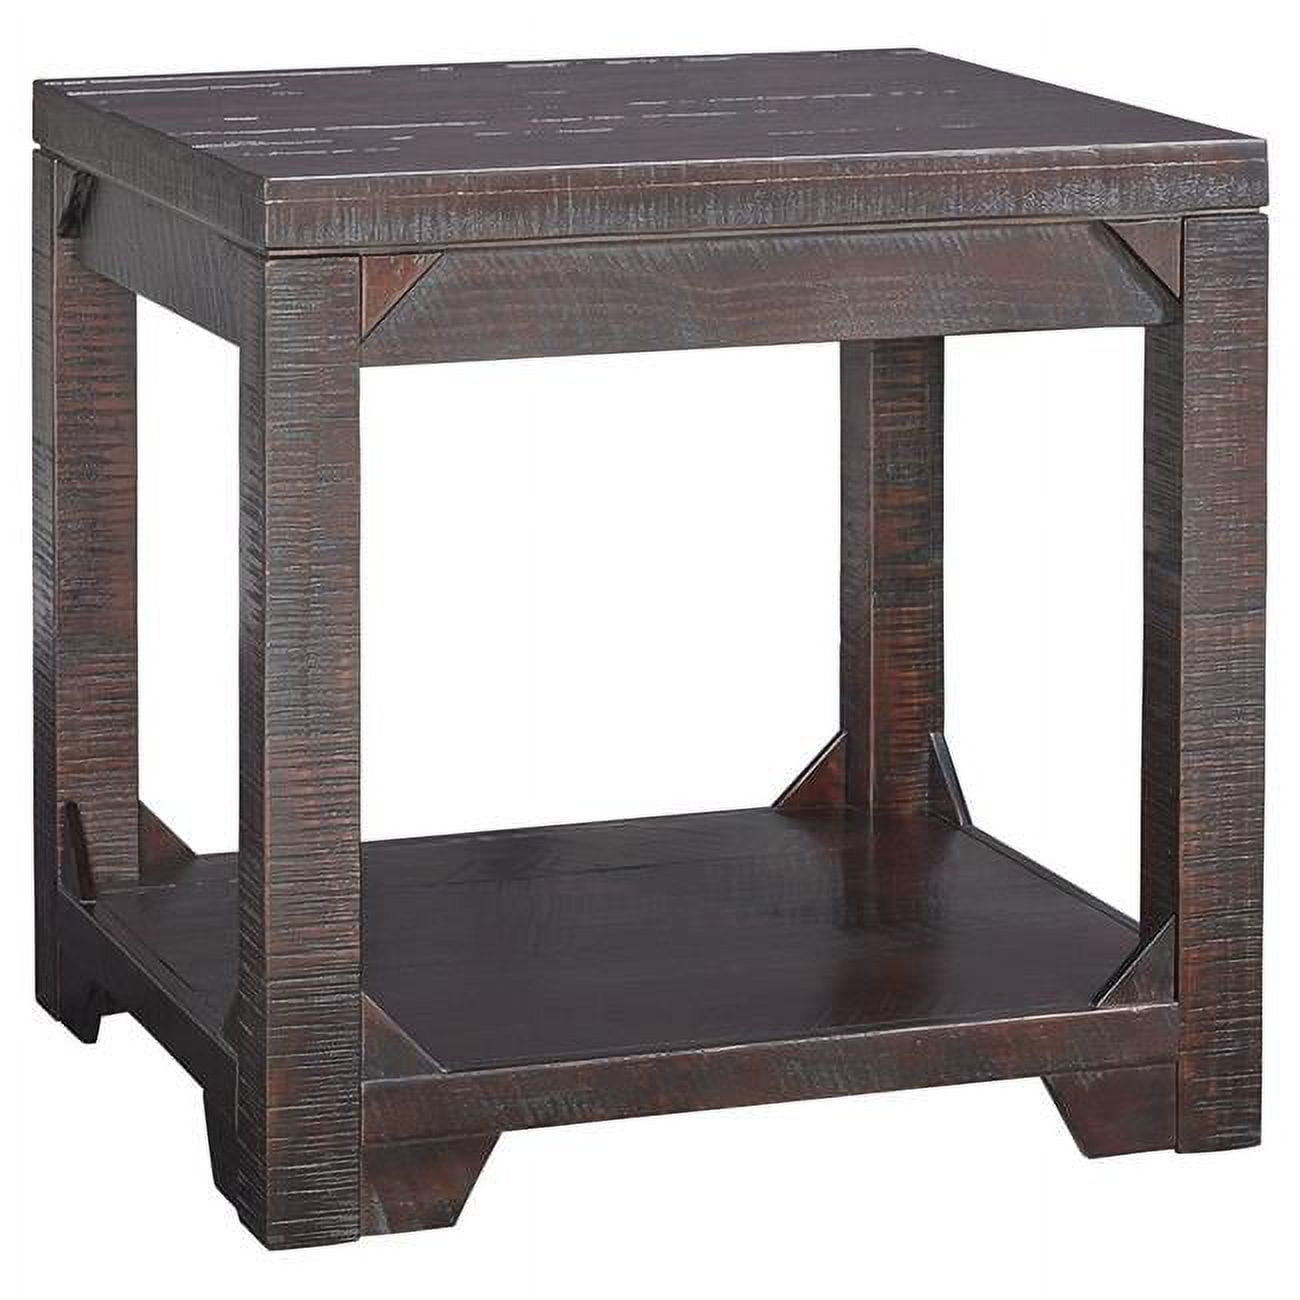 Picture of Benzara BM207237 Rough Sawn Textured Wooden End Table with One Shelf  Brown - 25.25 x 22 x  37.05